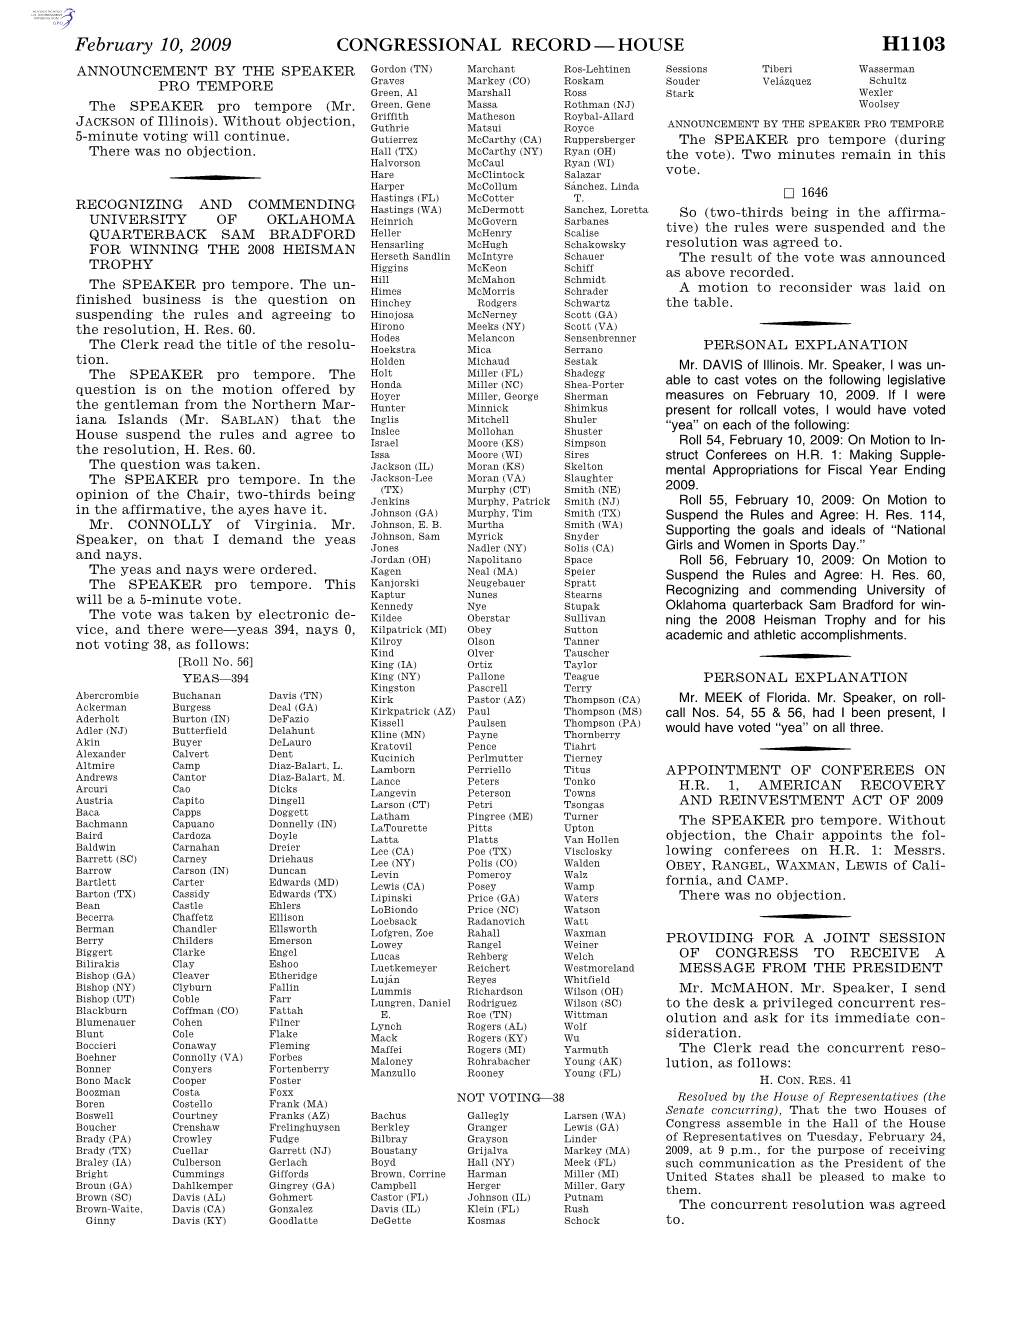 Congressional Record—House H1103